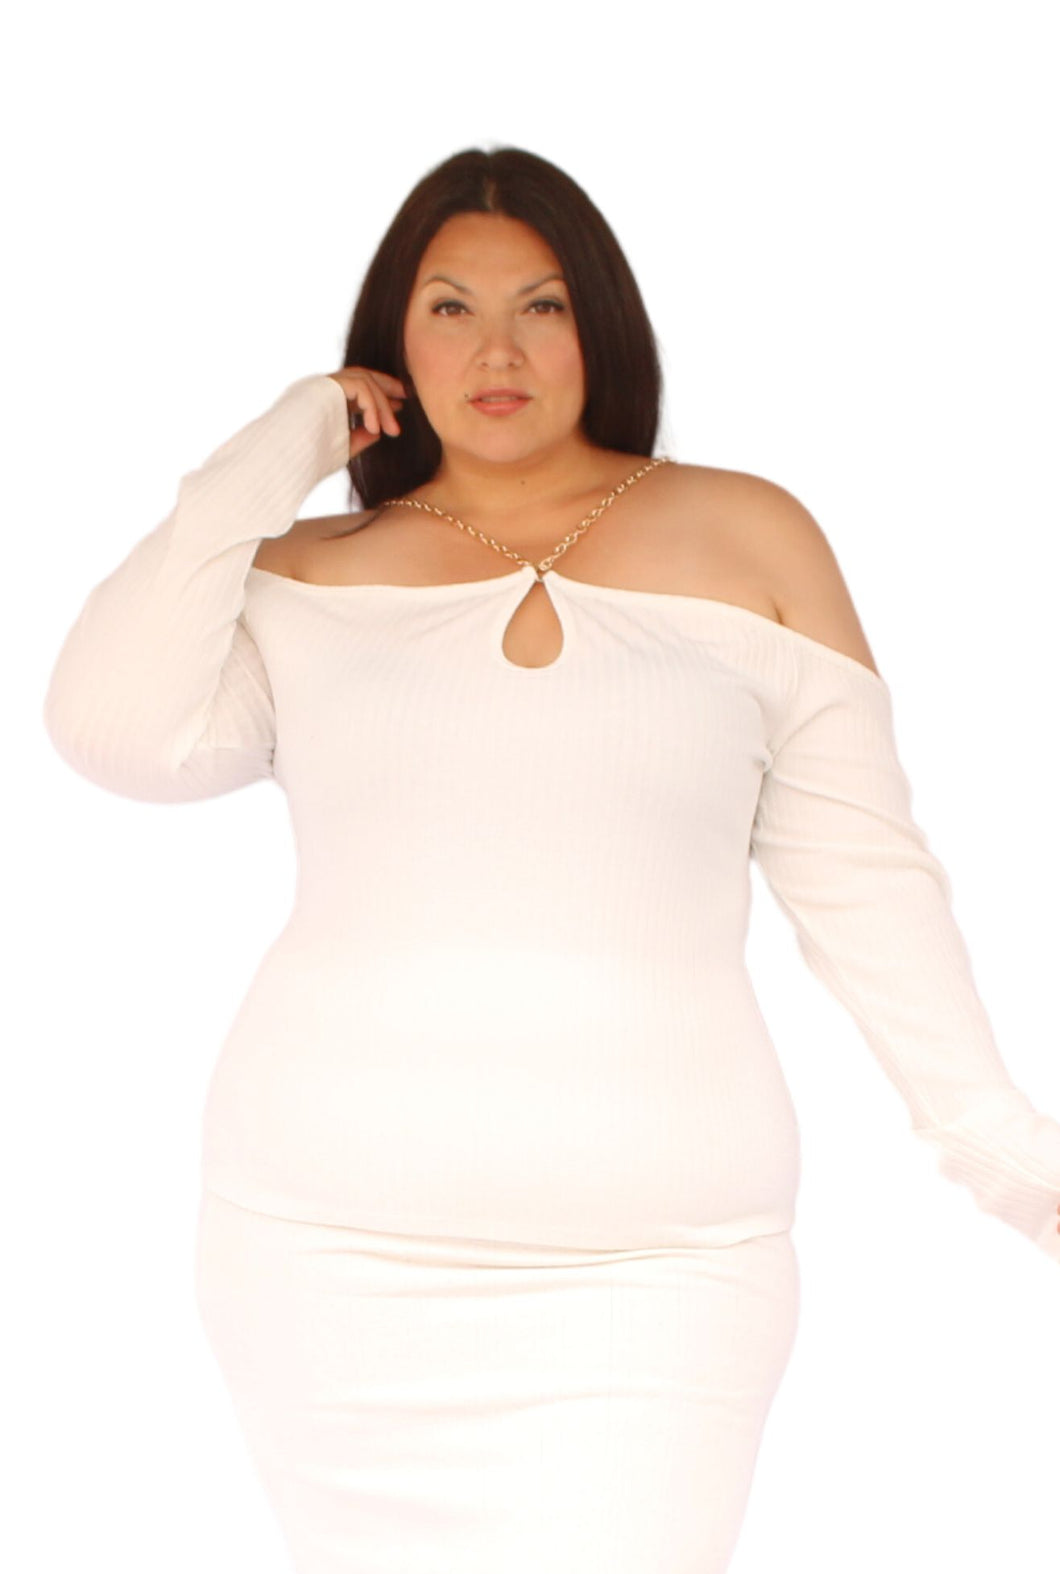 Fashion To Figure Long Sleeve Of the Shoulder White Top, Size 3X